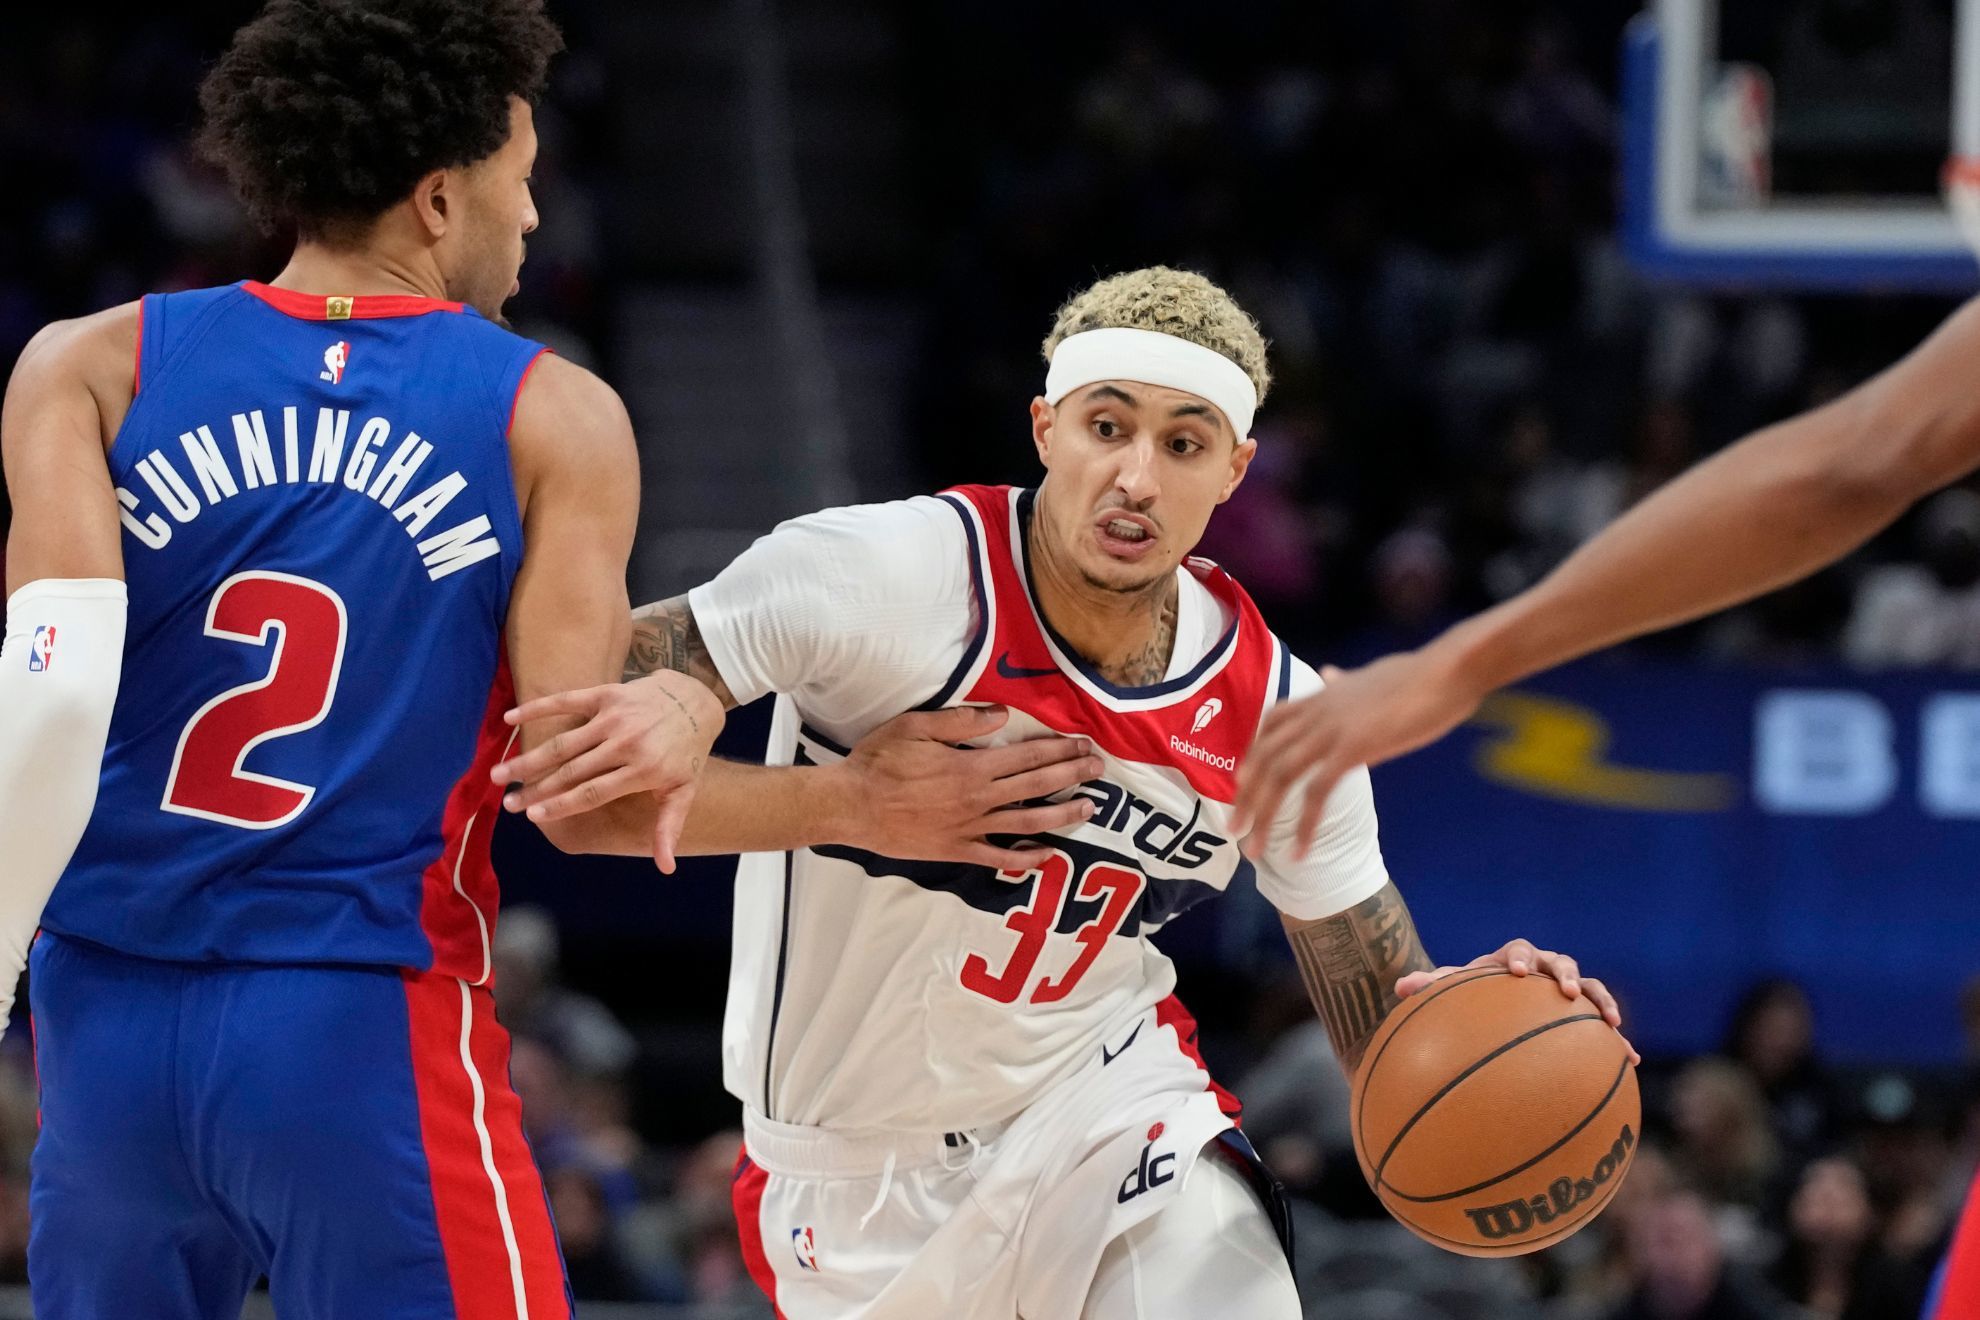 Kyle Kuzma helps Wizards snap 9-game skid with double-double vs. Pistons